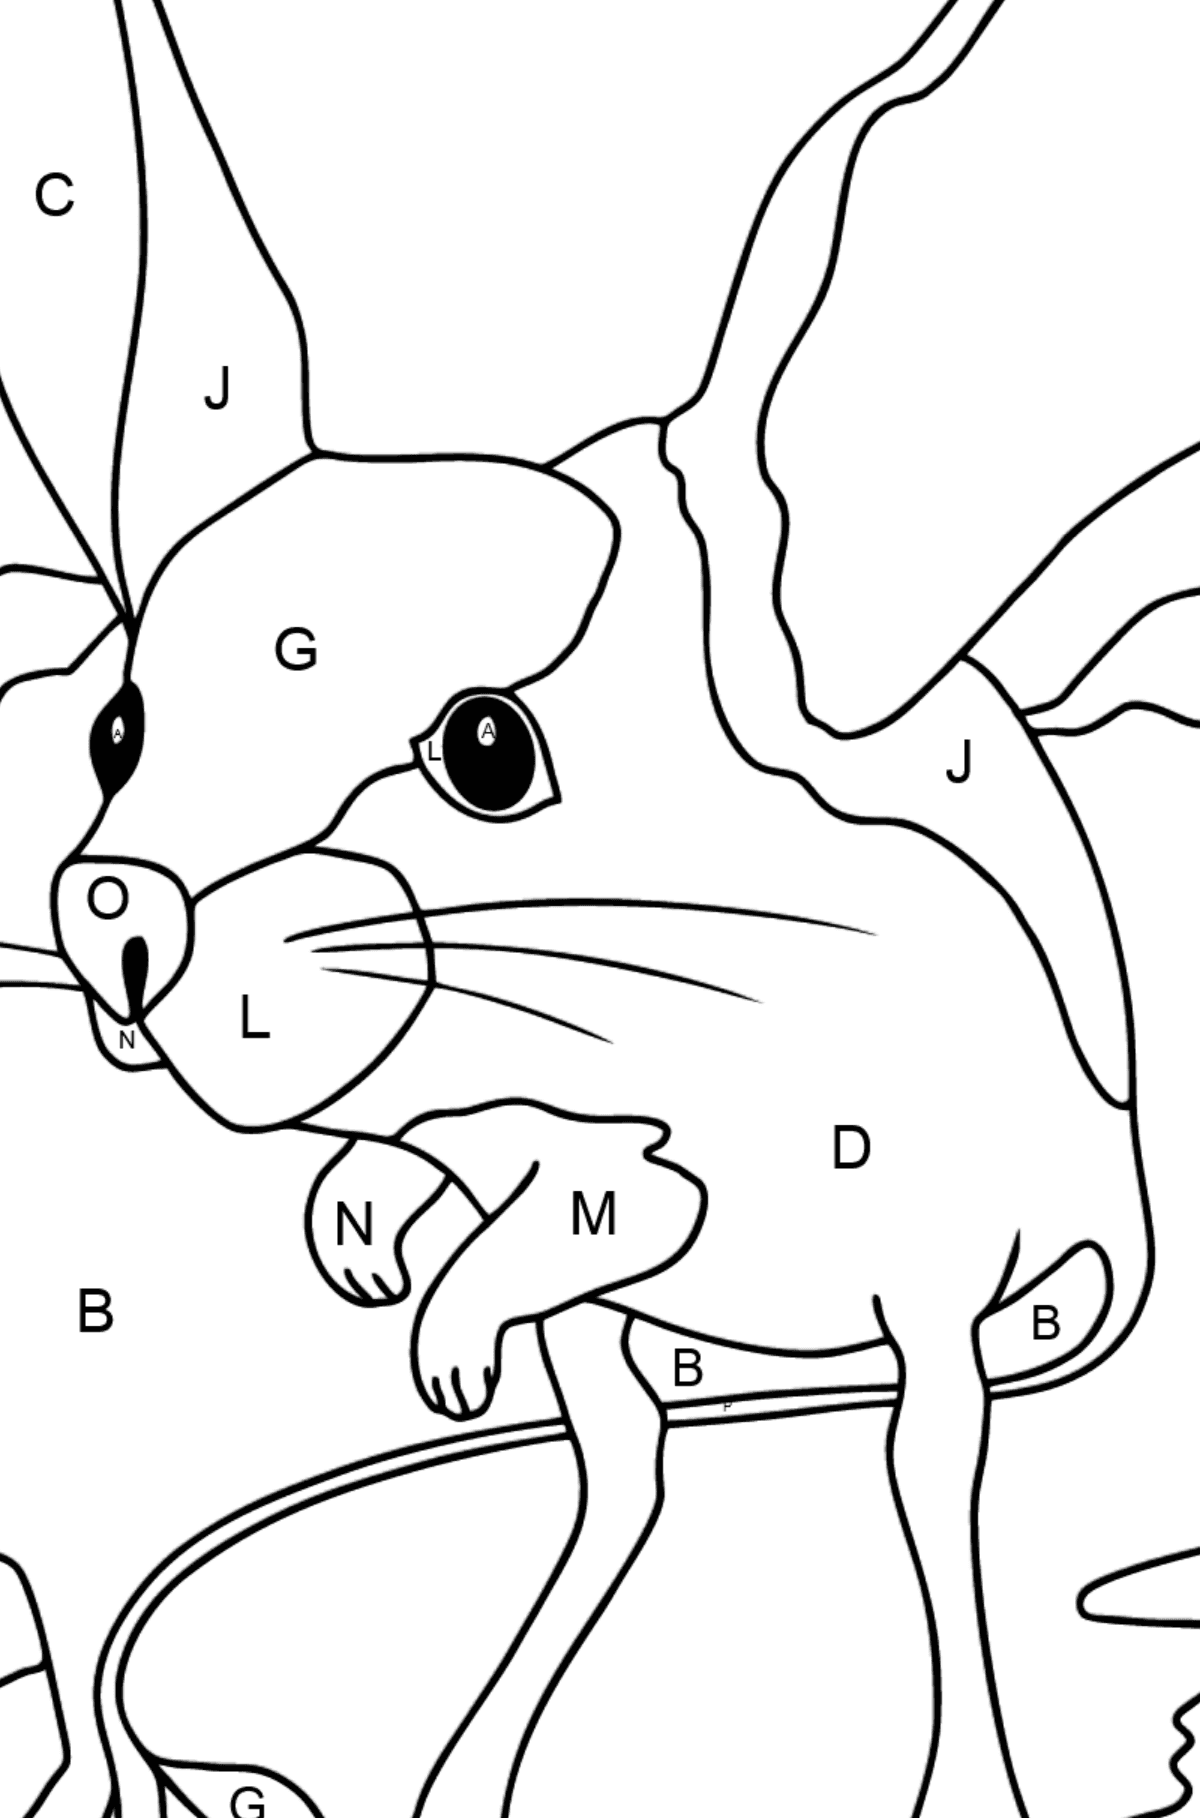 A Jerboa is Inspecting the Area Coloring Page - Coloring by Letters for Kids